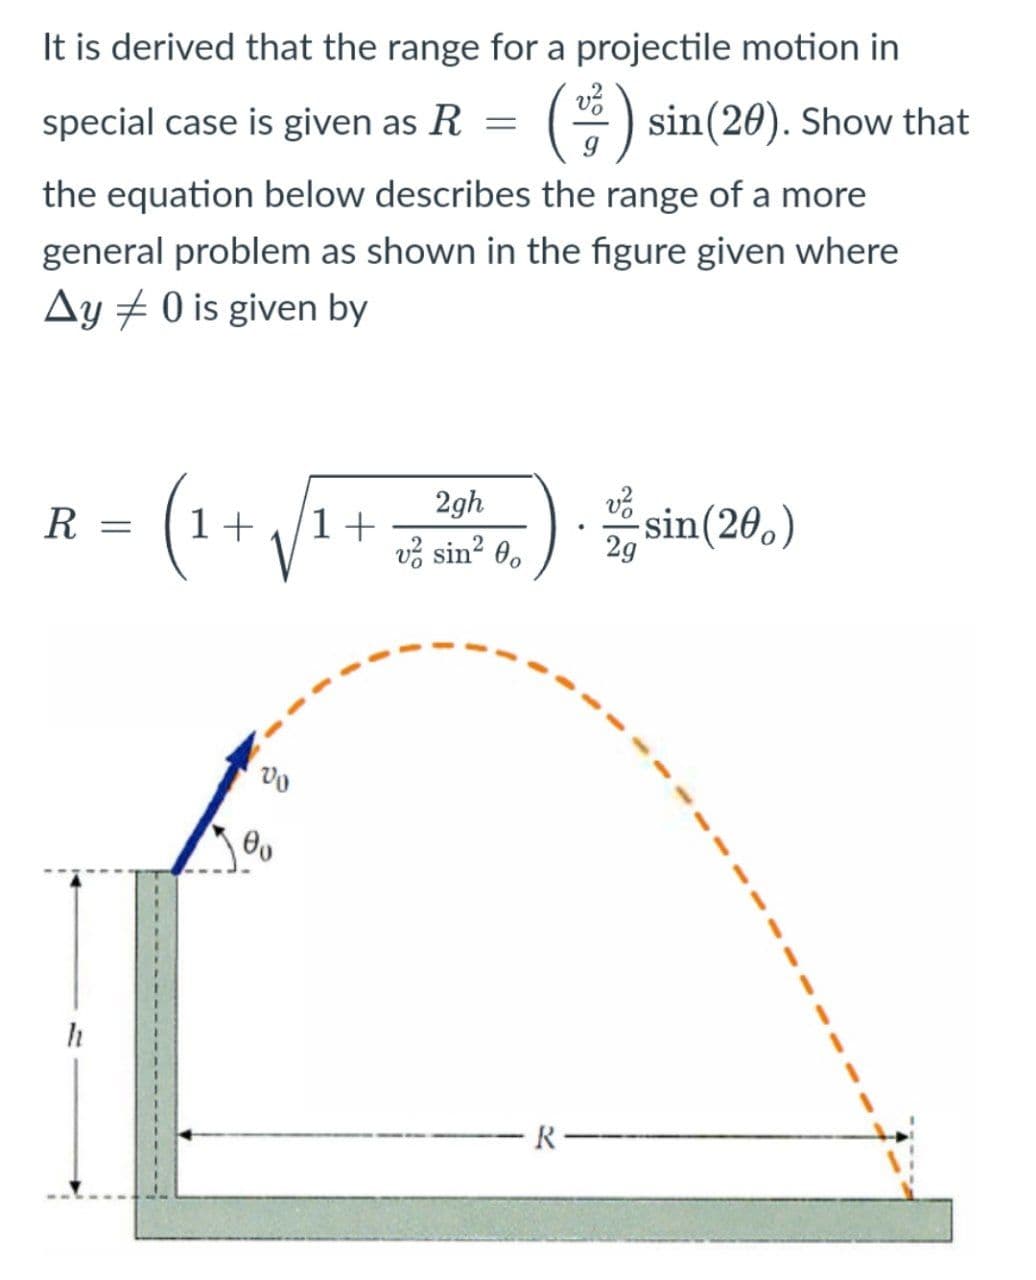 It is derived that the range for a projectile motion in
special case is given as R = () sin(20). Show that
the equation below describes the range of a more
general problem as shown in the figure given where
Ay + 0 is given by
1+)sin(26,)
2gh
R
1+
V
vž sin? 0.
R-
